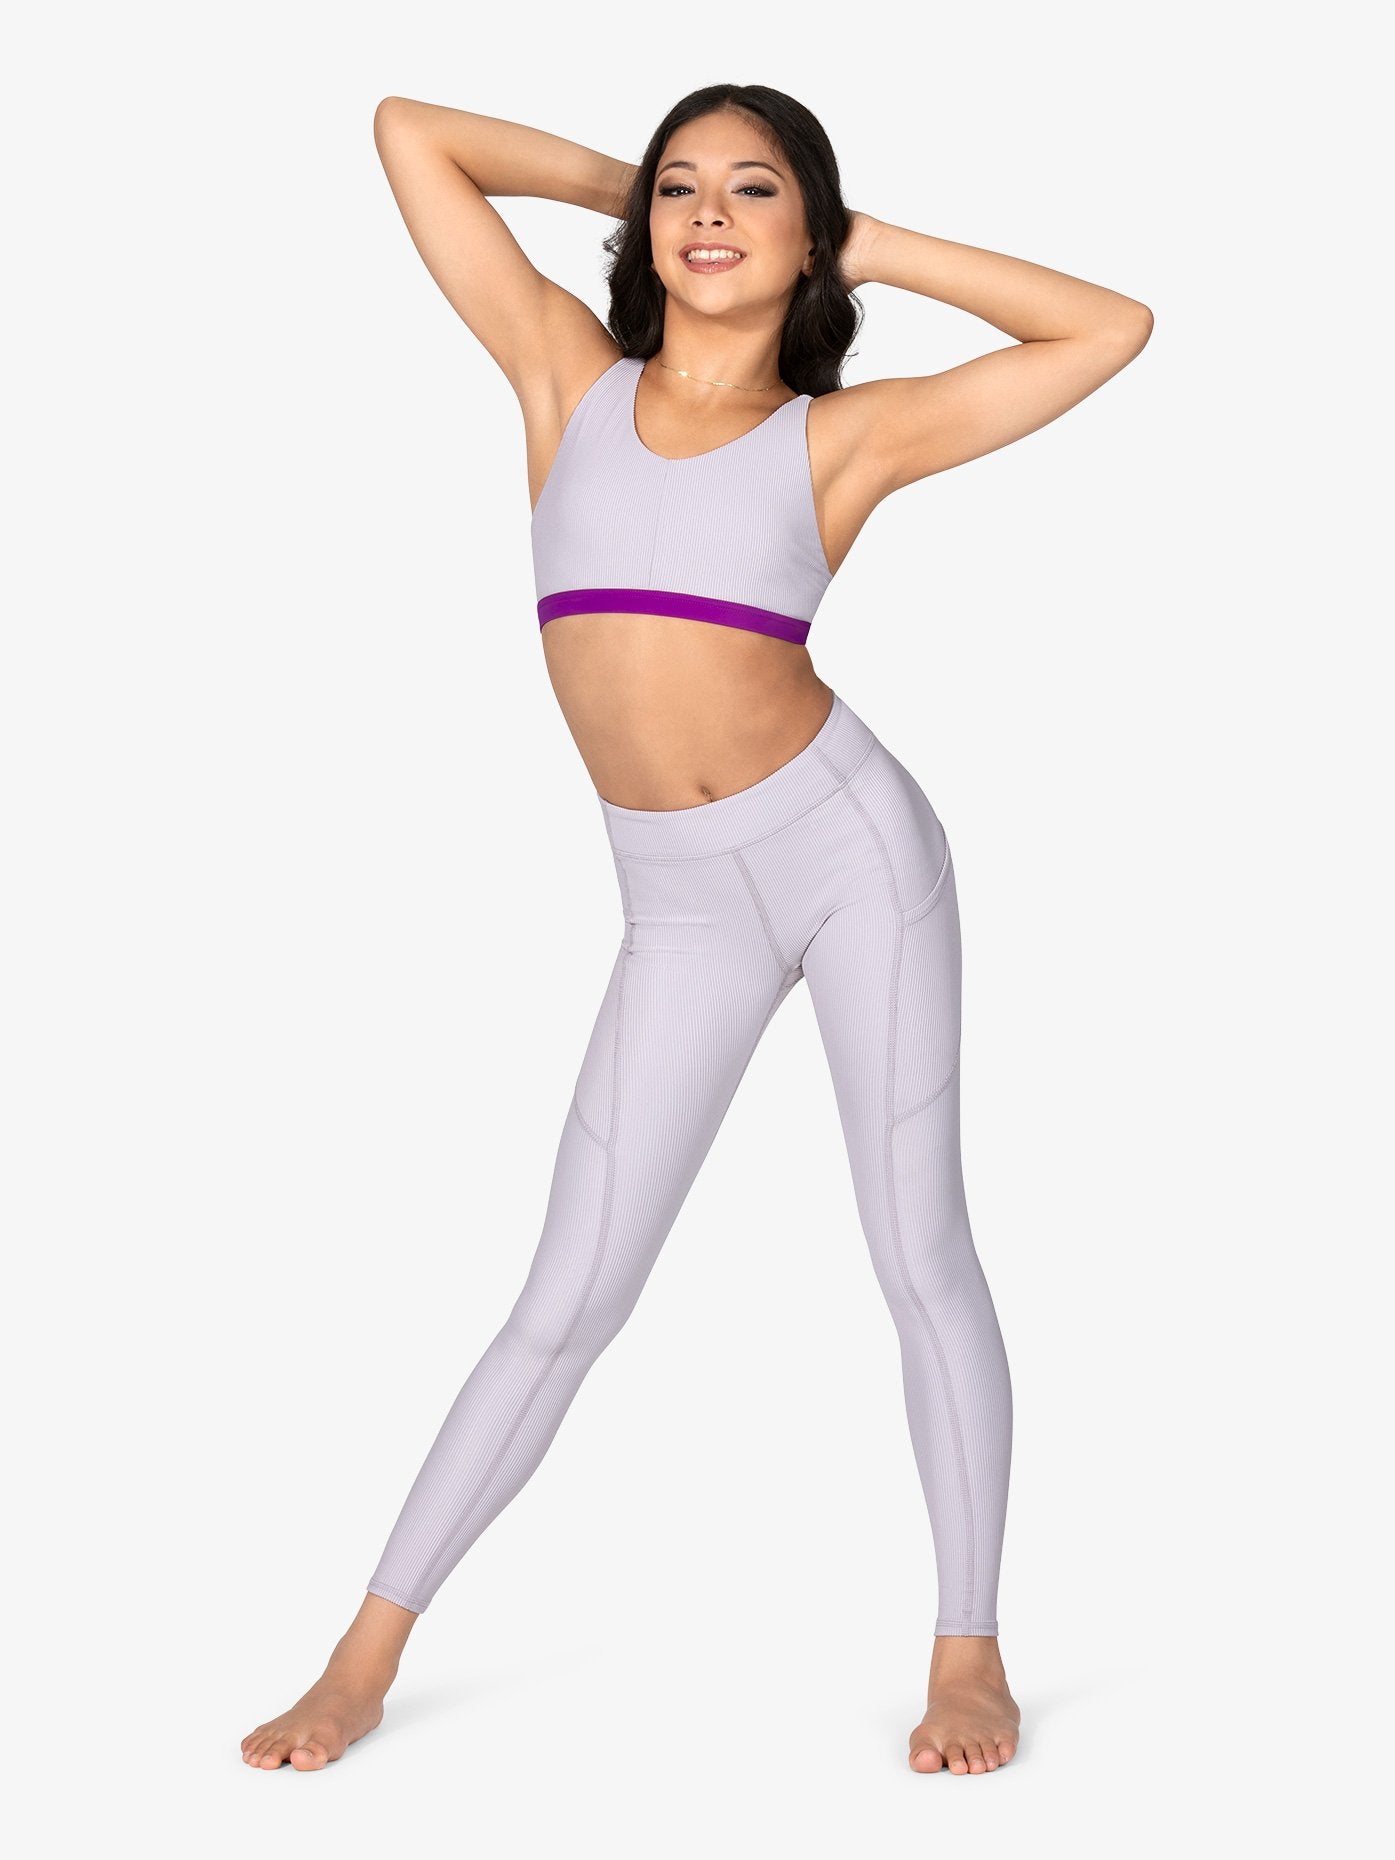 Women's high waist leggings featuring ribbed texture and convenient side pocket